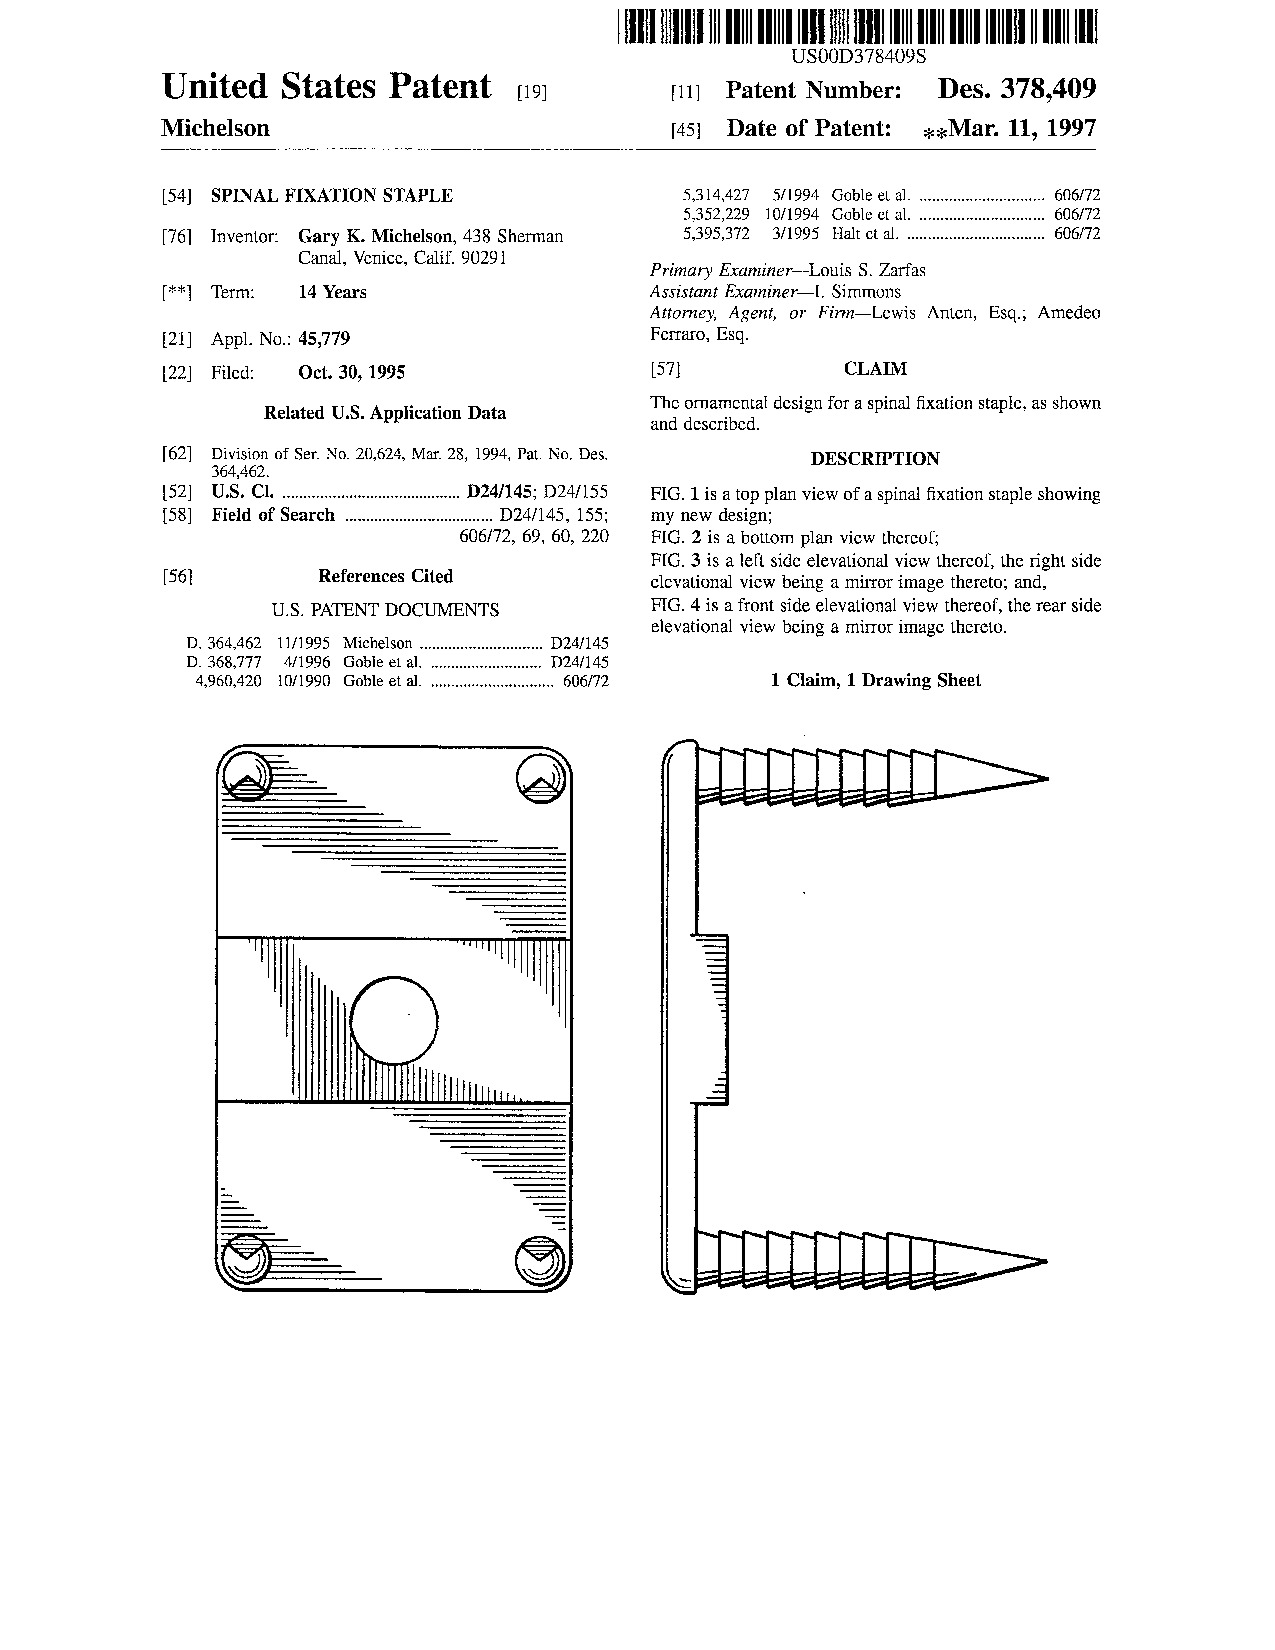 Spinal fixation staple - Patent D378,409